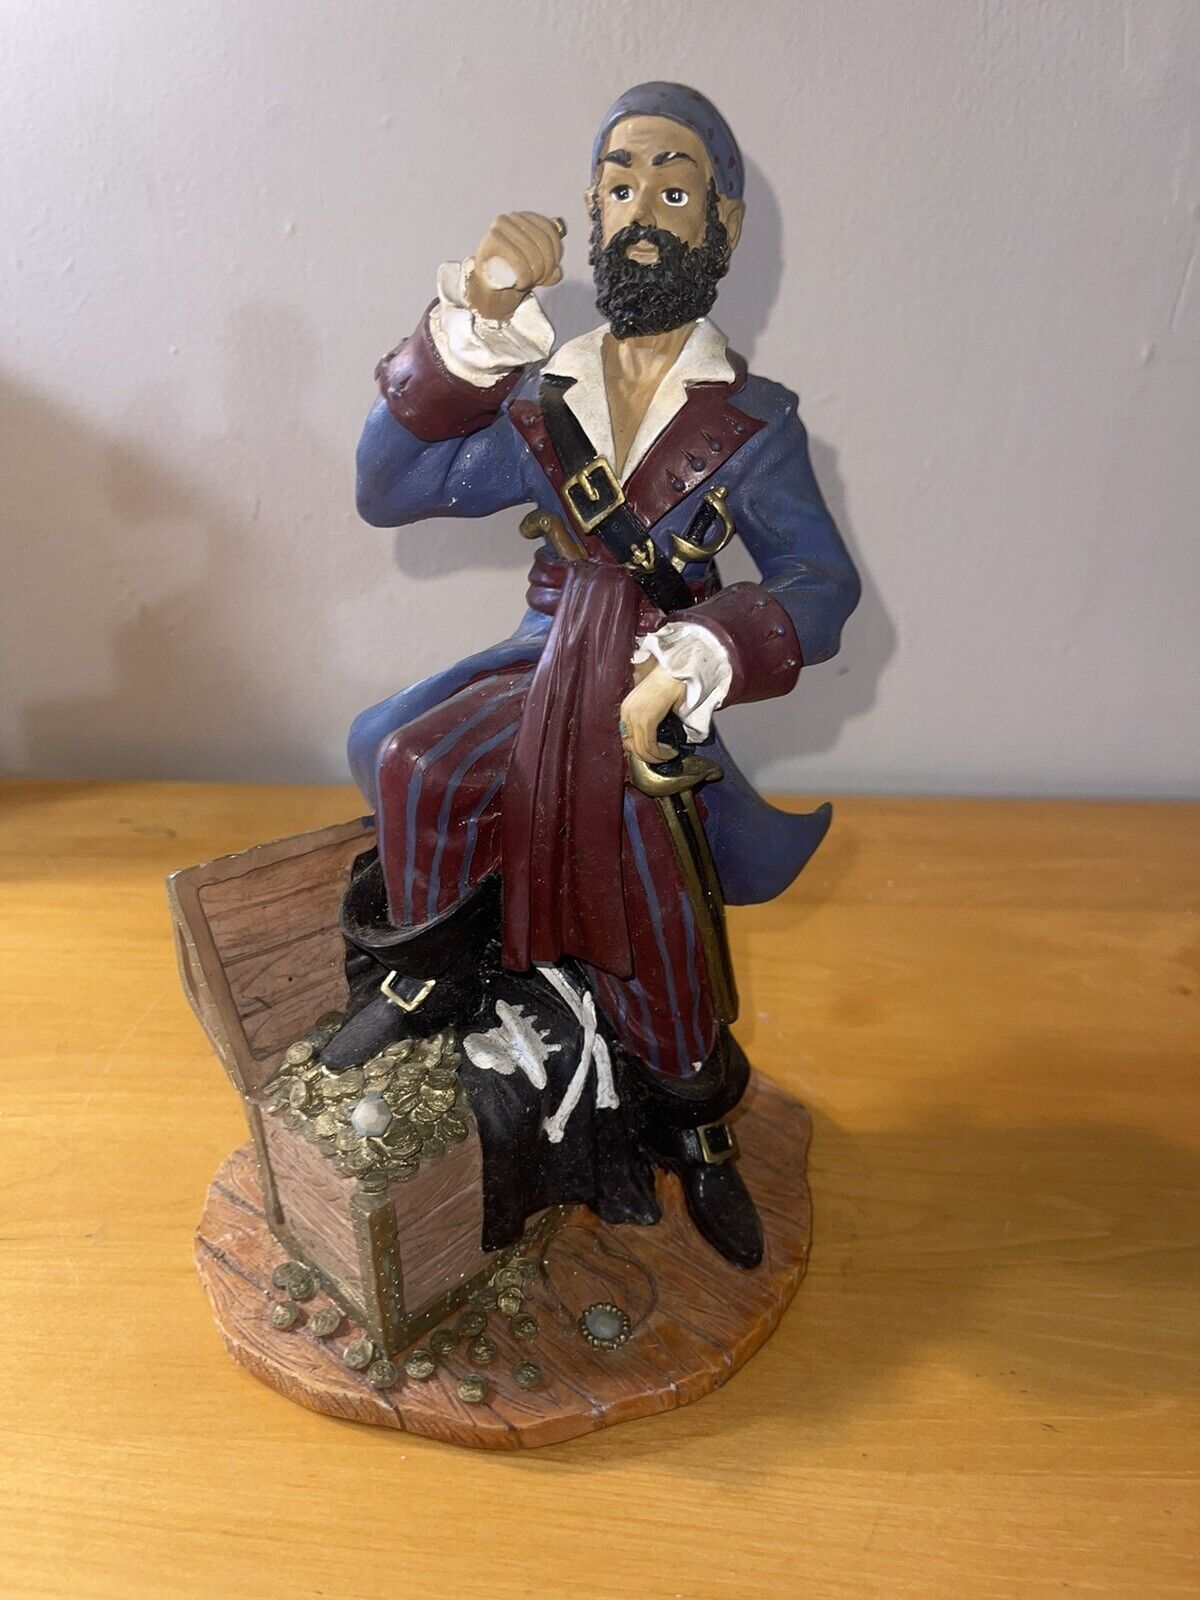 Vintage Pirate Figure Material Is Like A PVC Plastic. Very Sturdy